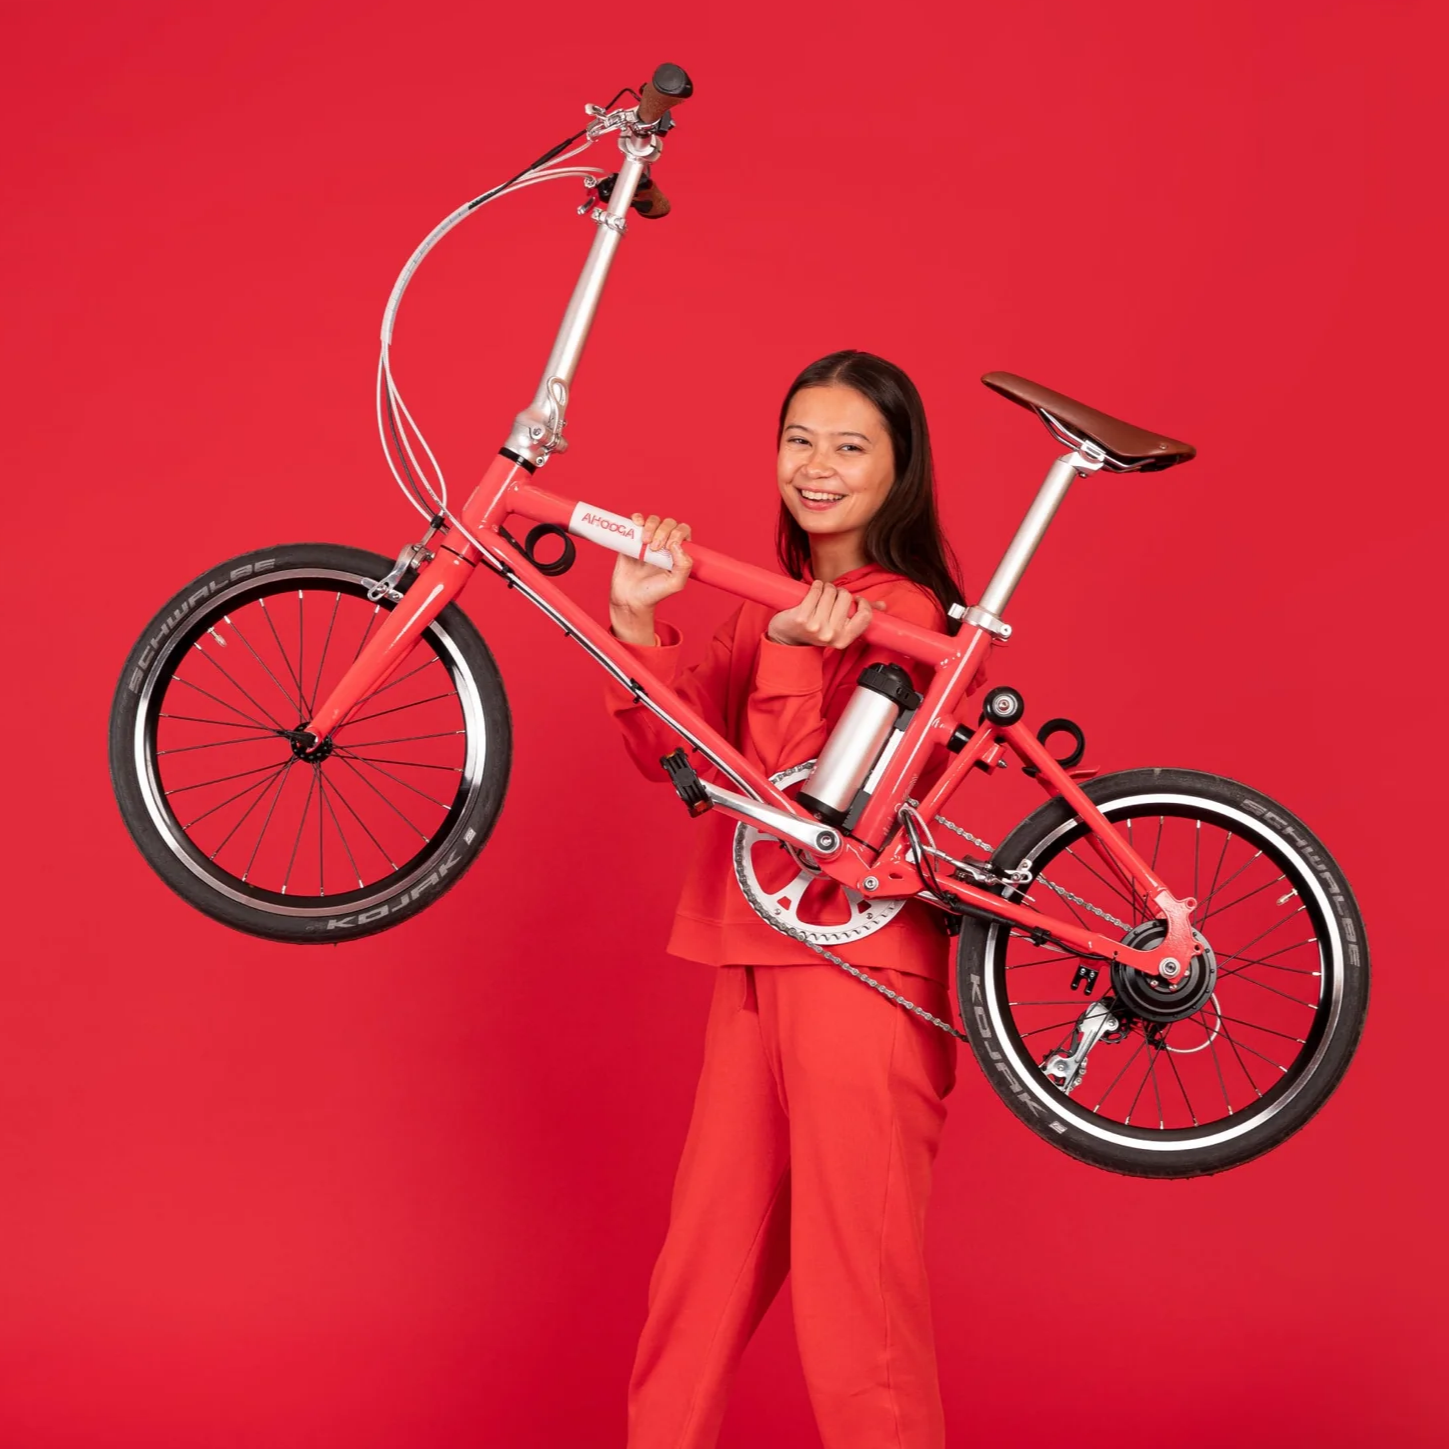 A product image of the Ahooga Active 24V folding electric bike being held up by a female model in a red studio setting. The frame colour is red. The Ahooga Active is available to buy from Bleeper.